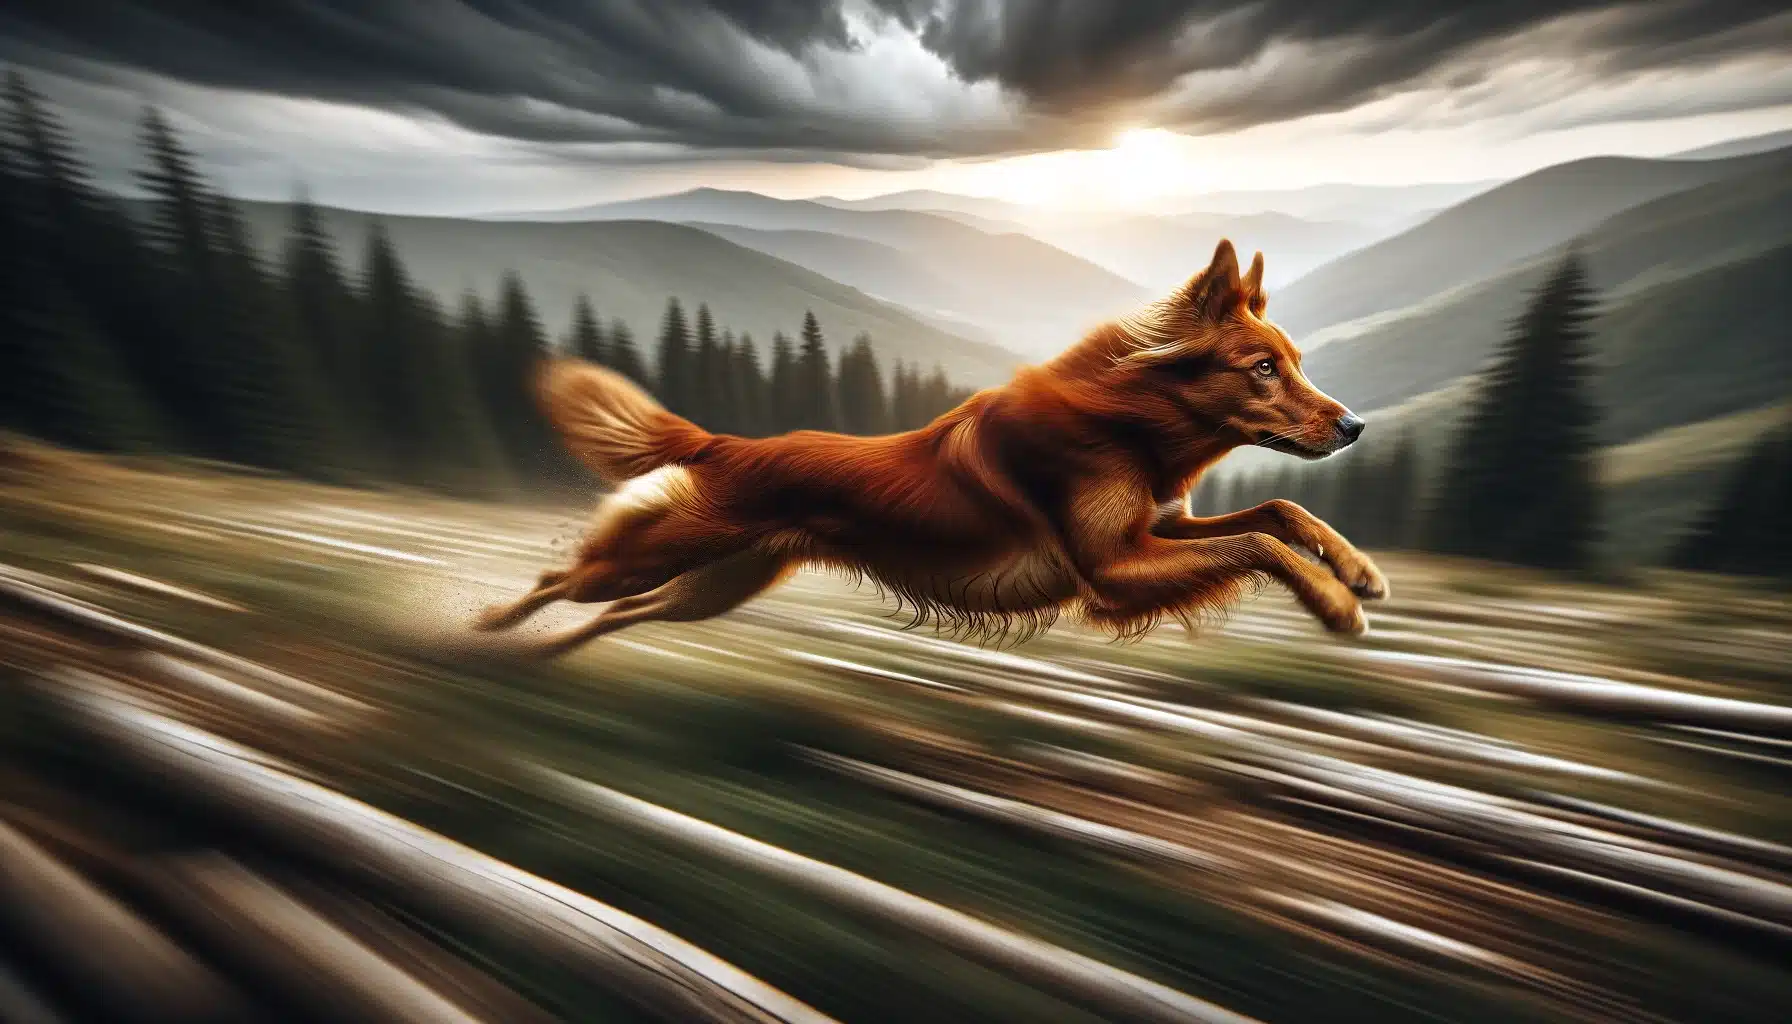 Running dog in sharp focus with a motion-blurred natural background, capturing speed and movement.